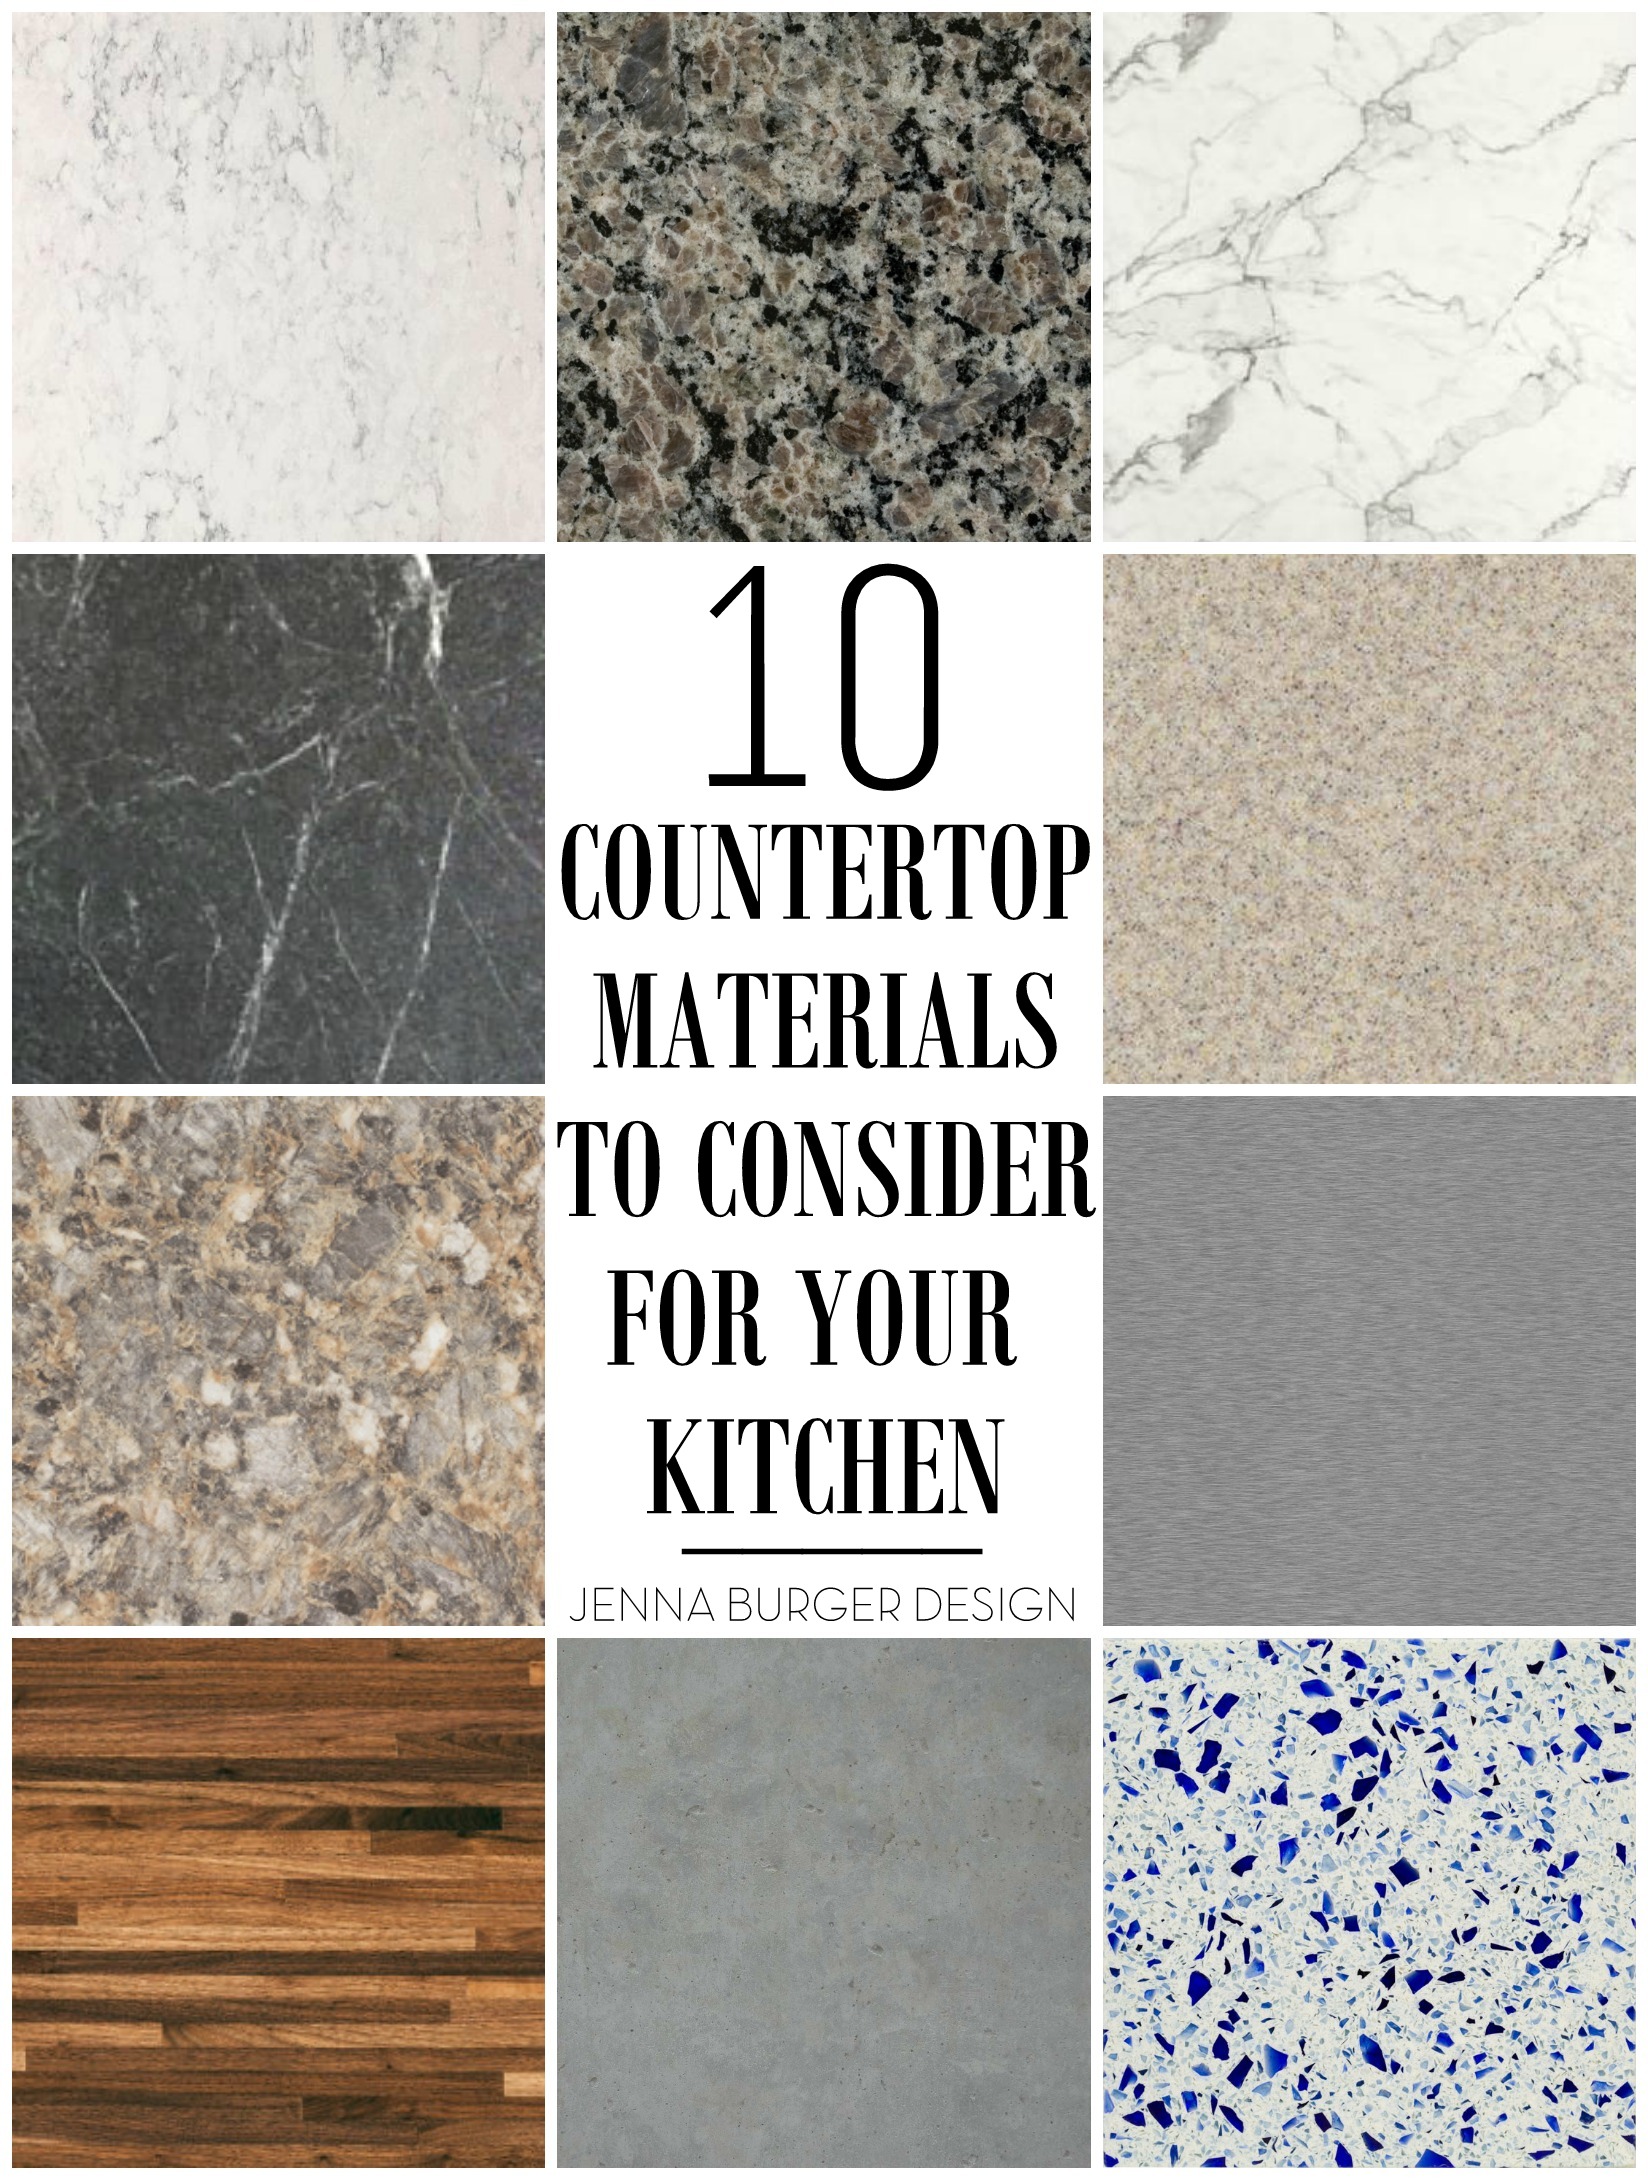 10 countertop materials to consider for the kitchen – jenna burger